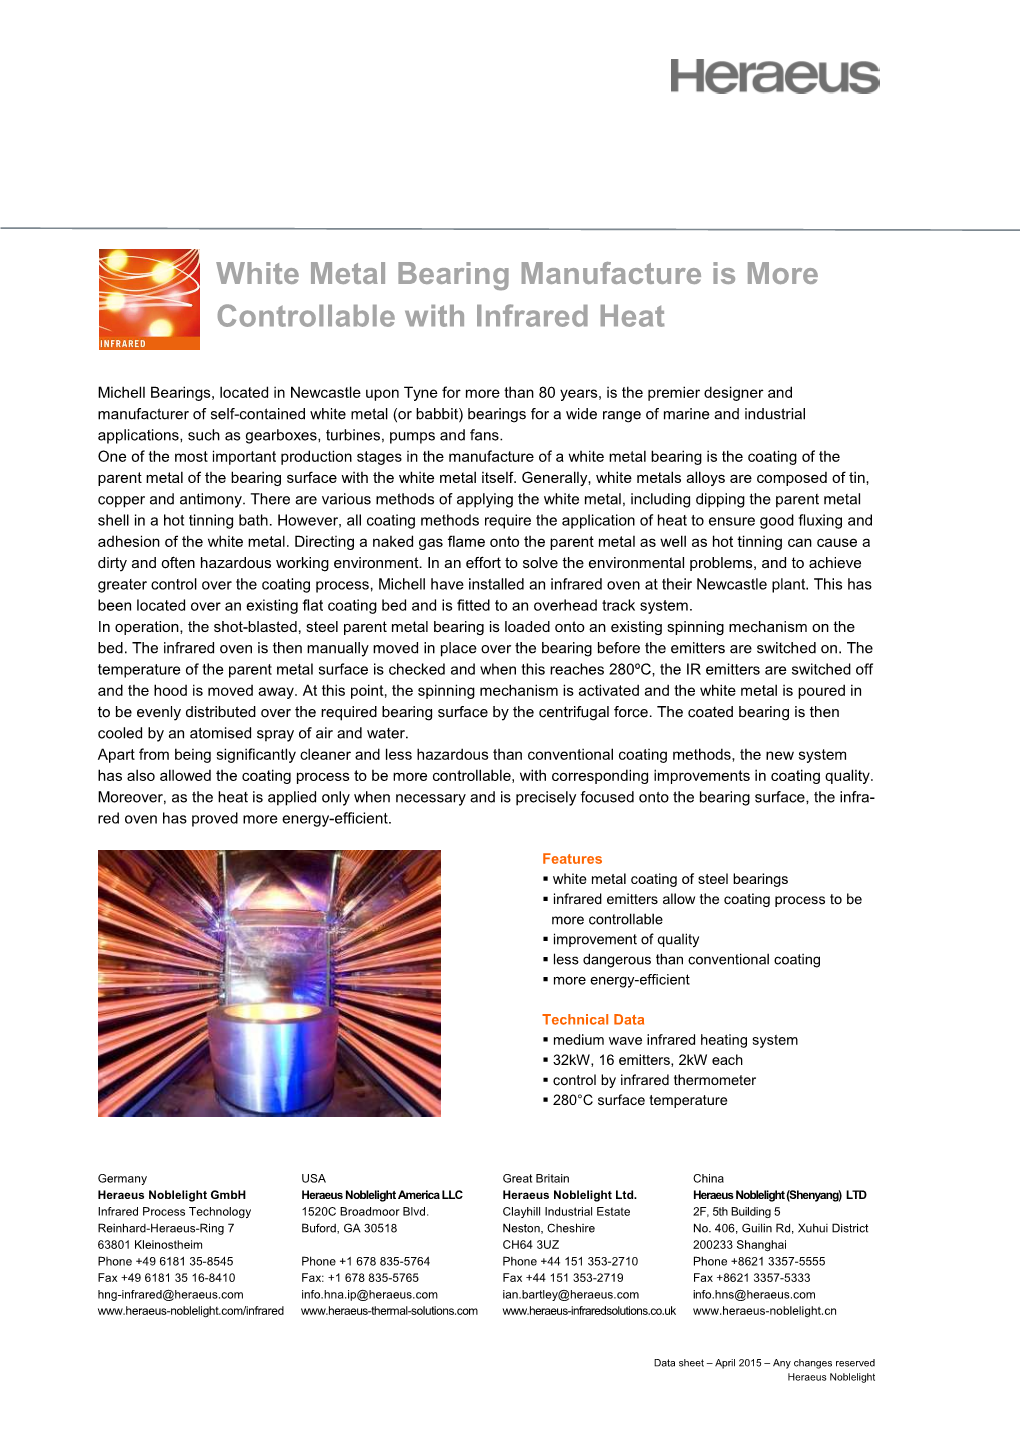 White Metal Bearing Manufacture Is More Controllable with Infrared Heat